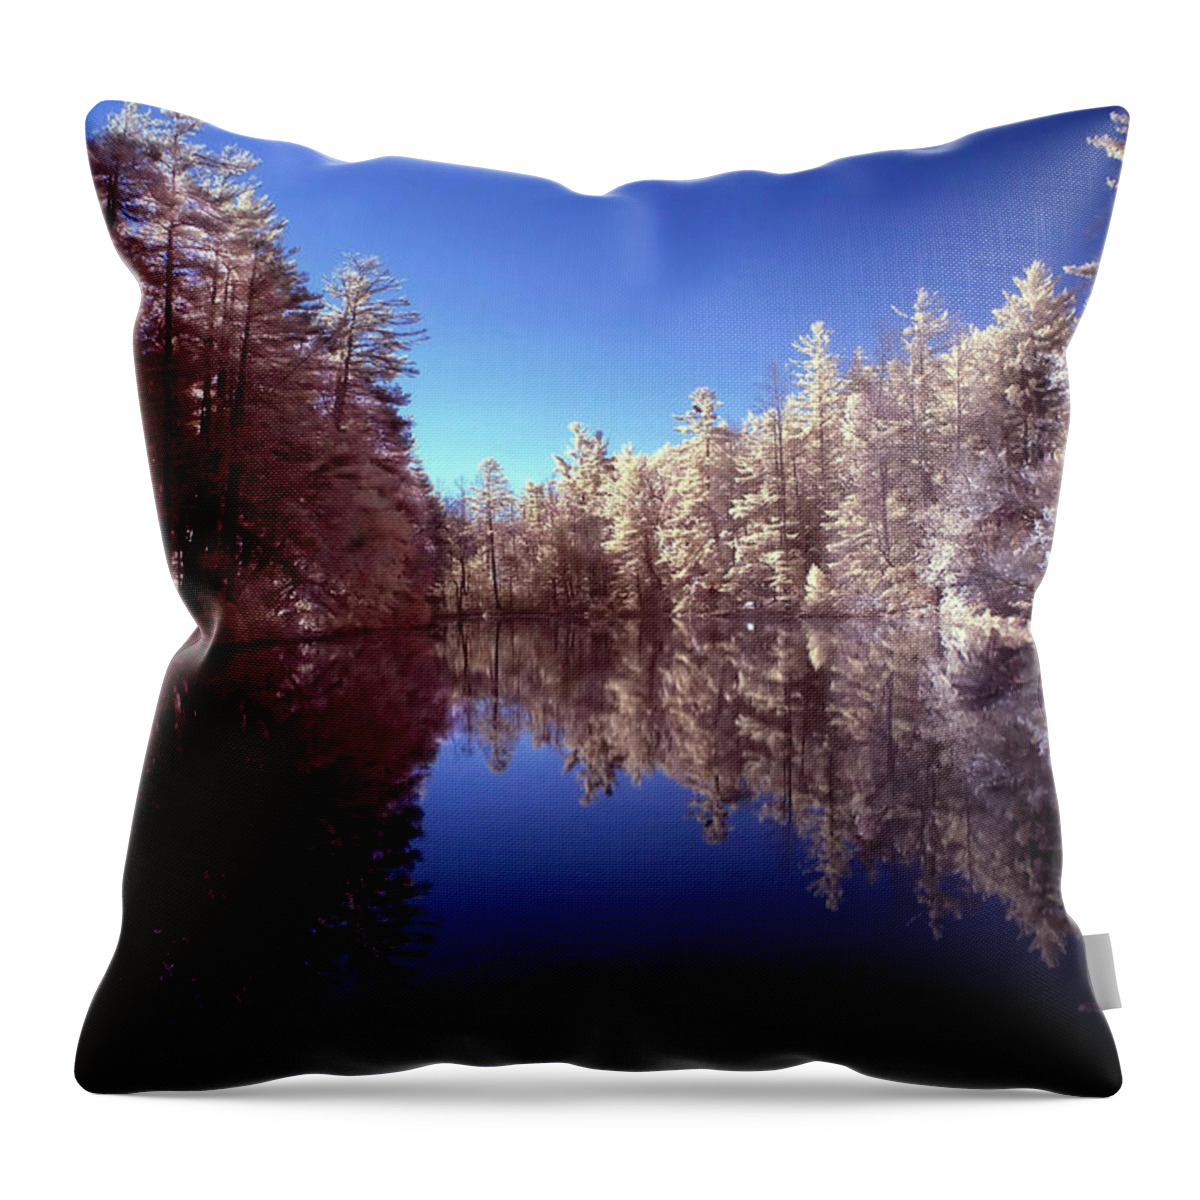 Infrared Throw Pillow featuring the photograph Lake in Infrared by Anthony M Davis